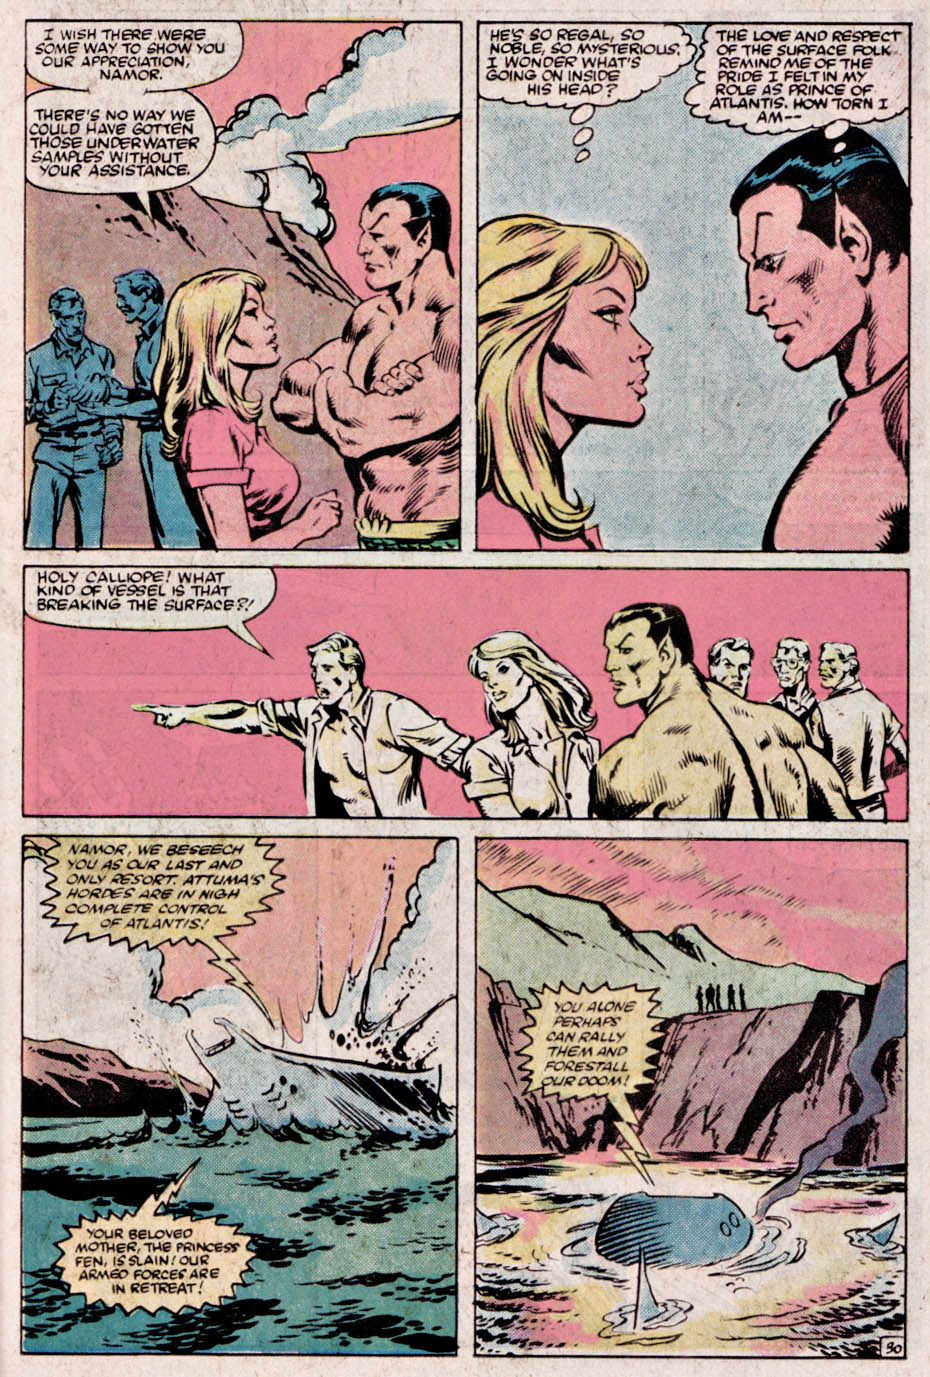 What If? (1977) issue 41 - The Sub-mariner had saved Atlantis from its destiny - Page 30